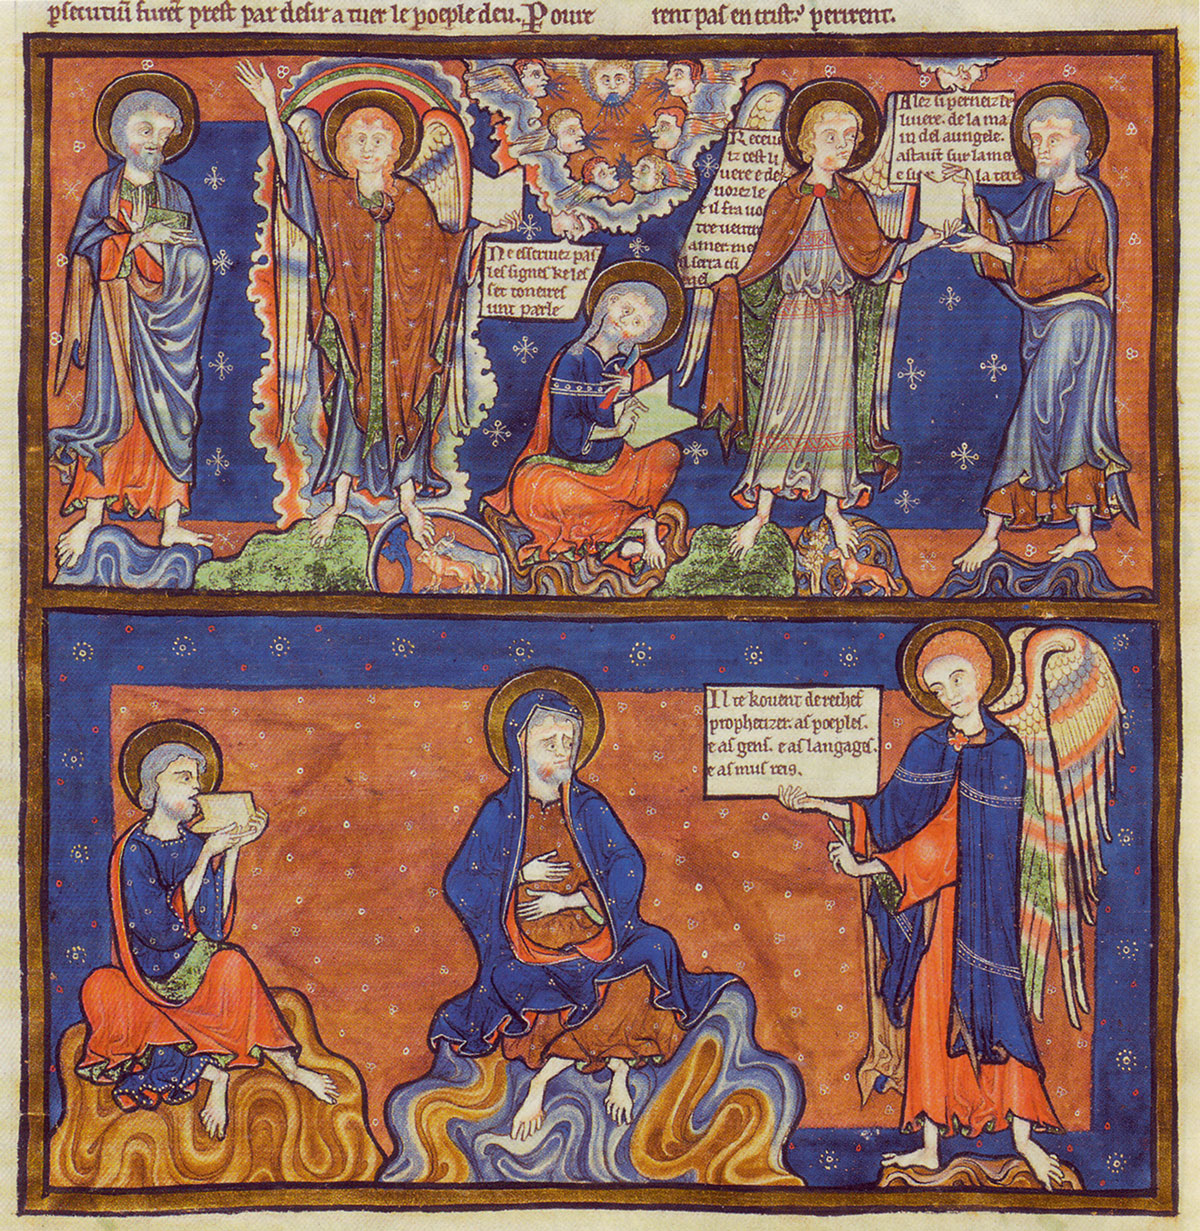 Illustration from the Trinity Apocalypse, a thirteenth-century English illuminated manuscript of the Apocalypse, or Book of Revelations. The French text, an abbreviated version of that written by Berengaudus in the early twelfth century, reads: “The Appearance of the Great Angel and the Seven Thunders. John is told by the angel not to write what the Seven Thunders have spoken; he is given a book to eat; he eats and finds it bitter; he is told by an angel to prophesy to the nations.” The manuscript, which has been preserved for centuries in Trinity College, Cambridge, was probably made for Queen Eleanor, wife of Henry III.